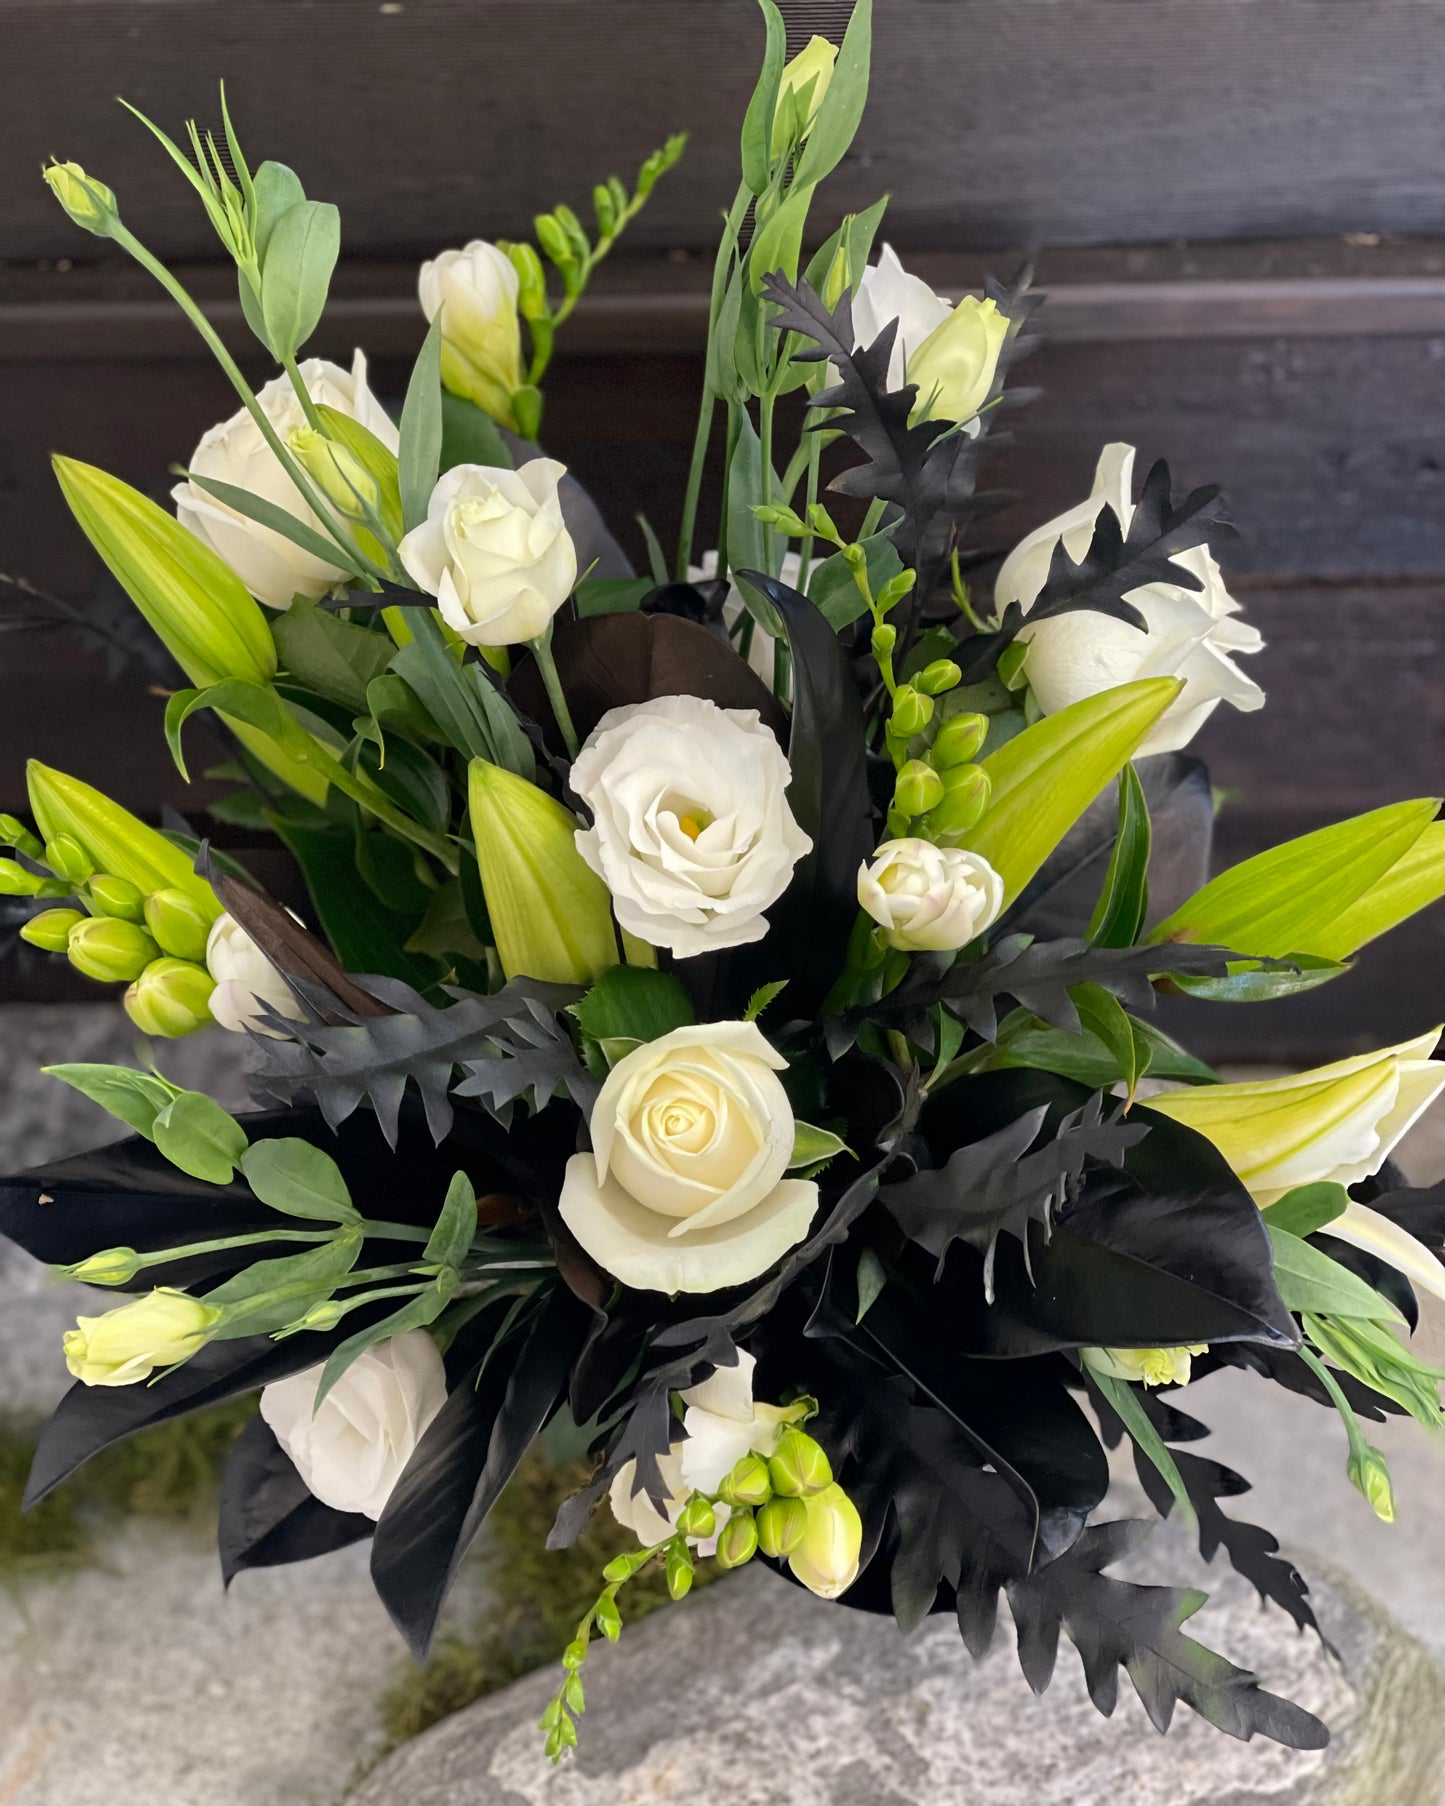 Flowersetc, Floral, Bouquet, Flowers, Gifts, Posy, Posey, Wellington, Lower Hutt, Upper Hutt, Petone, Eastbourne, Bright, Pastel, Florist, Florists, Creative, Flair, custom, bespoke, bunch, bunches, scent, plants, Indoor, wedding, sympathy, funeral, arrangement, floral, seasonal, excellent, elegant, prestige, buttonhole, corsage, gifts for mum, gifts for girlfriend, gifts for friends